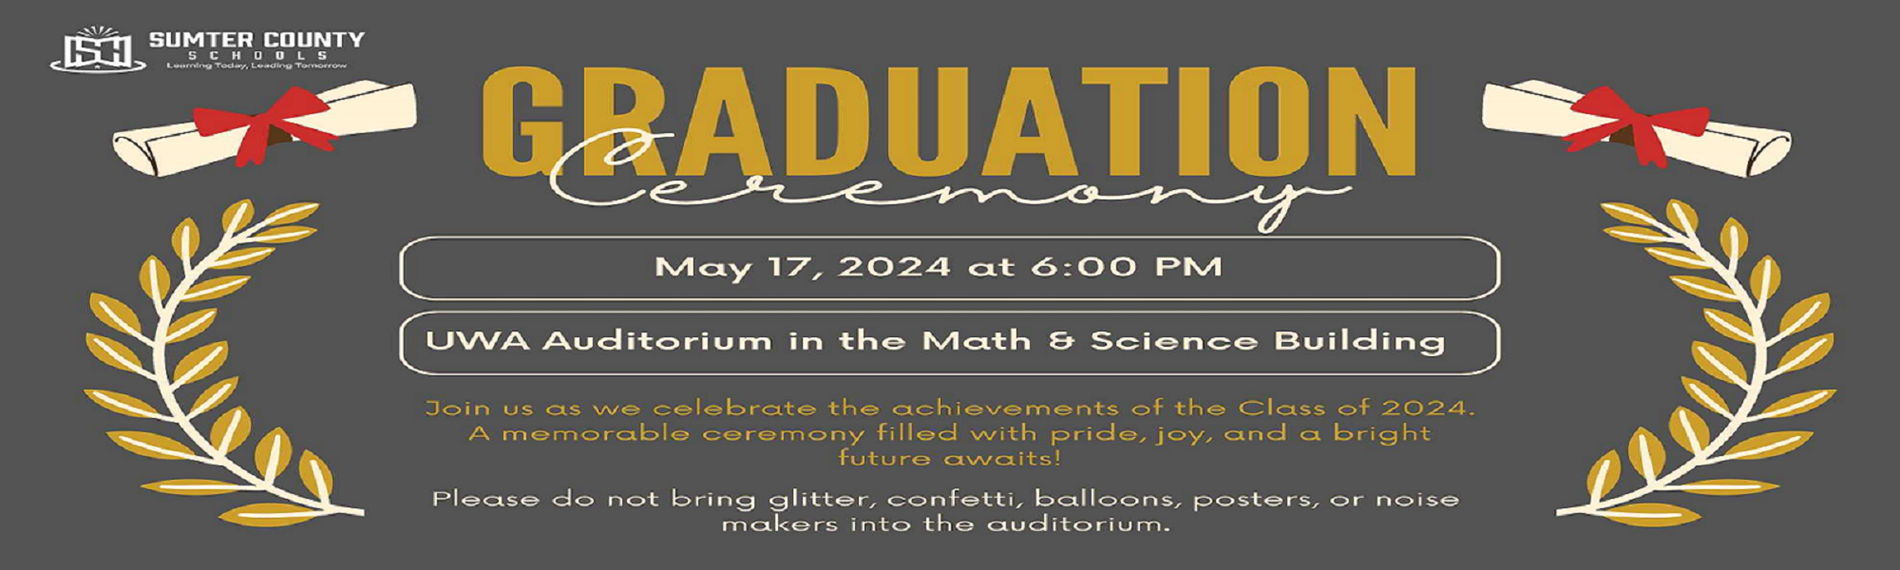 Graduation May 17, 24 at 6:00PM - UWA Auditorium in the Math & Science Building - Join us as we celebrate the achievements of the Class of 2024. 